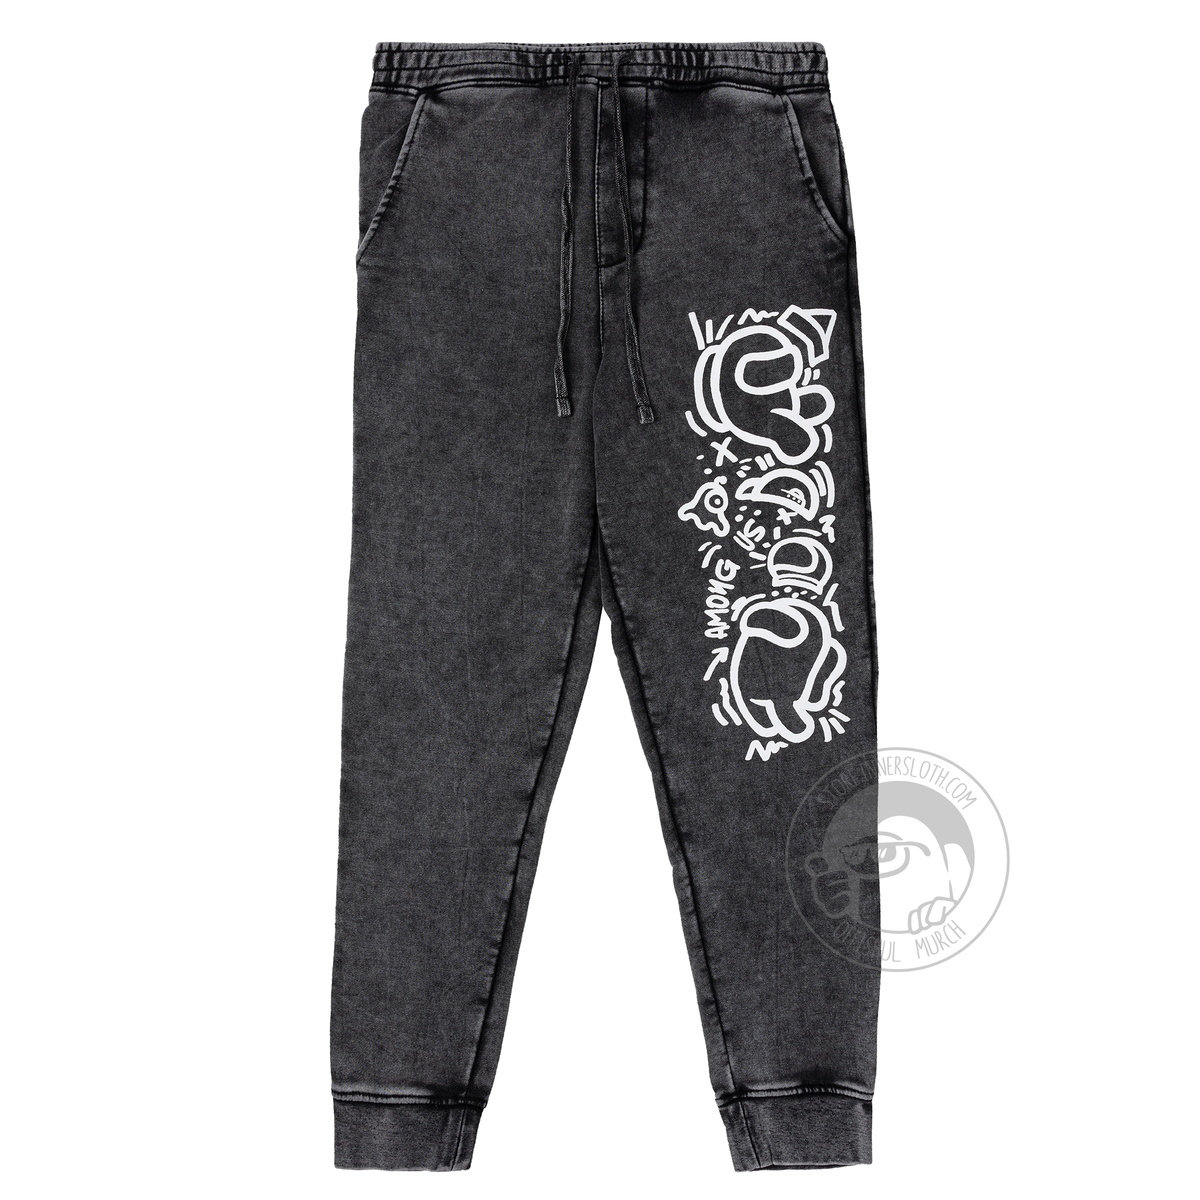  A flat lay product photograph of the textured gray joggers with a large patterned screenprint on the right pant leg on a white background. The artwork depicts a closely patterned arrangement of Crewmates, pets, and cosmetic motifs and has the words “Among Us” written slightly askew above the knee. The design is by Kiri Krogsgaard.